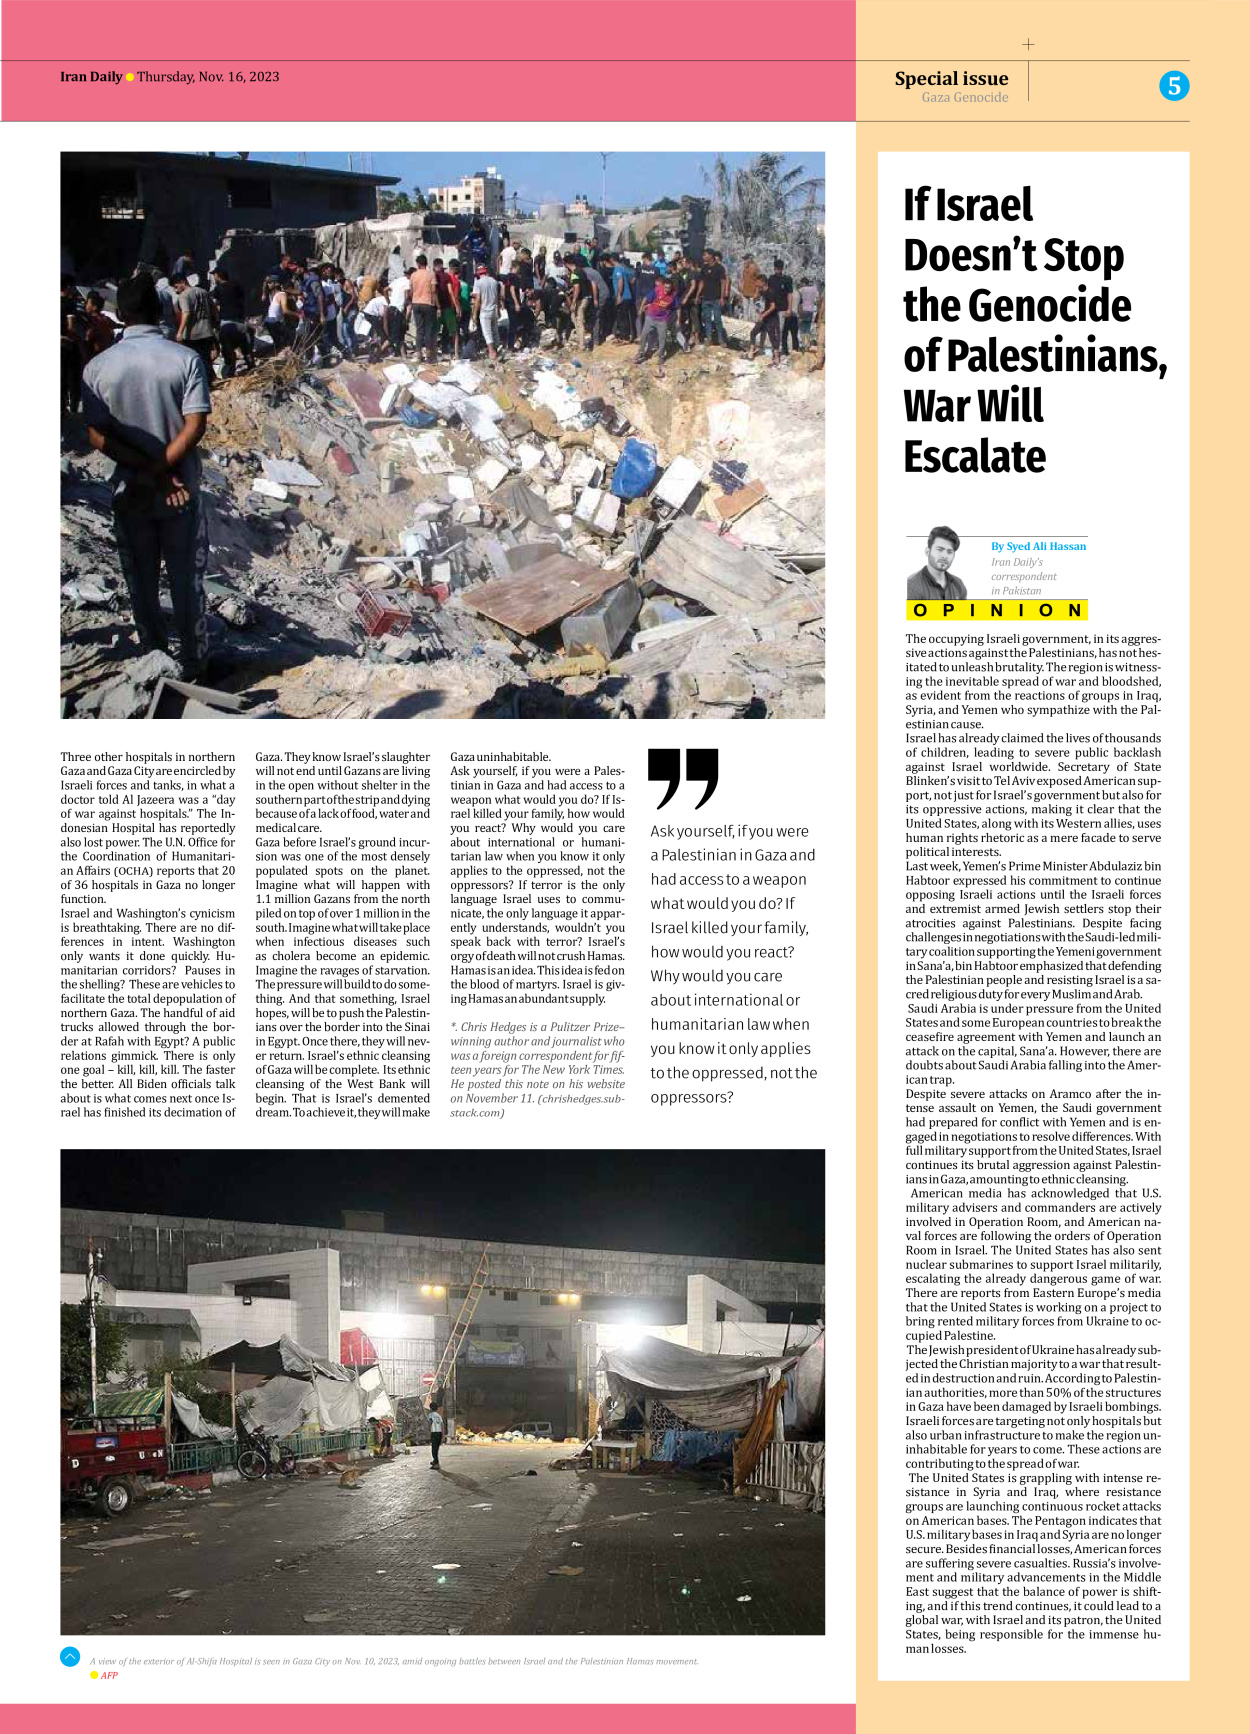 Iran Daily - Number Seven Thousand Four Hundred and Thirty Six - 16 November 2023 - Page 5